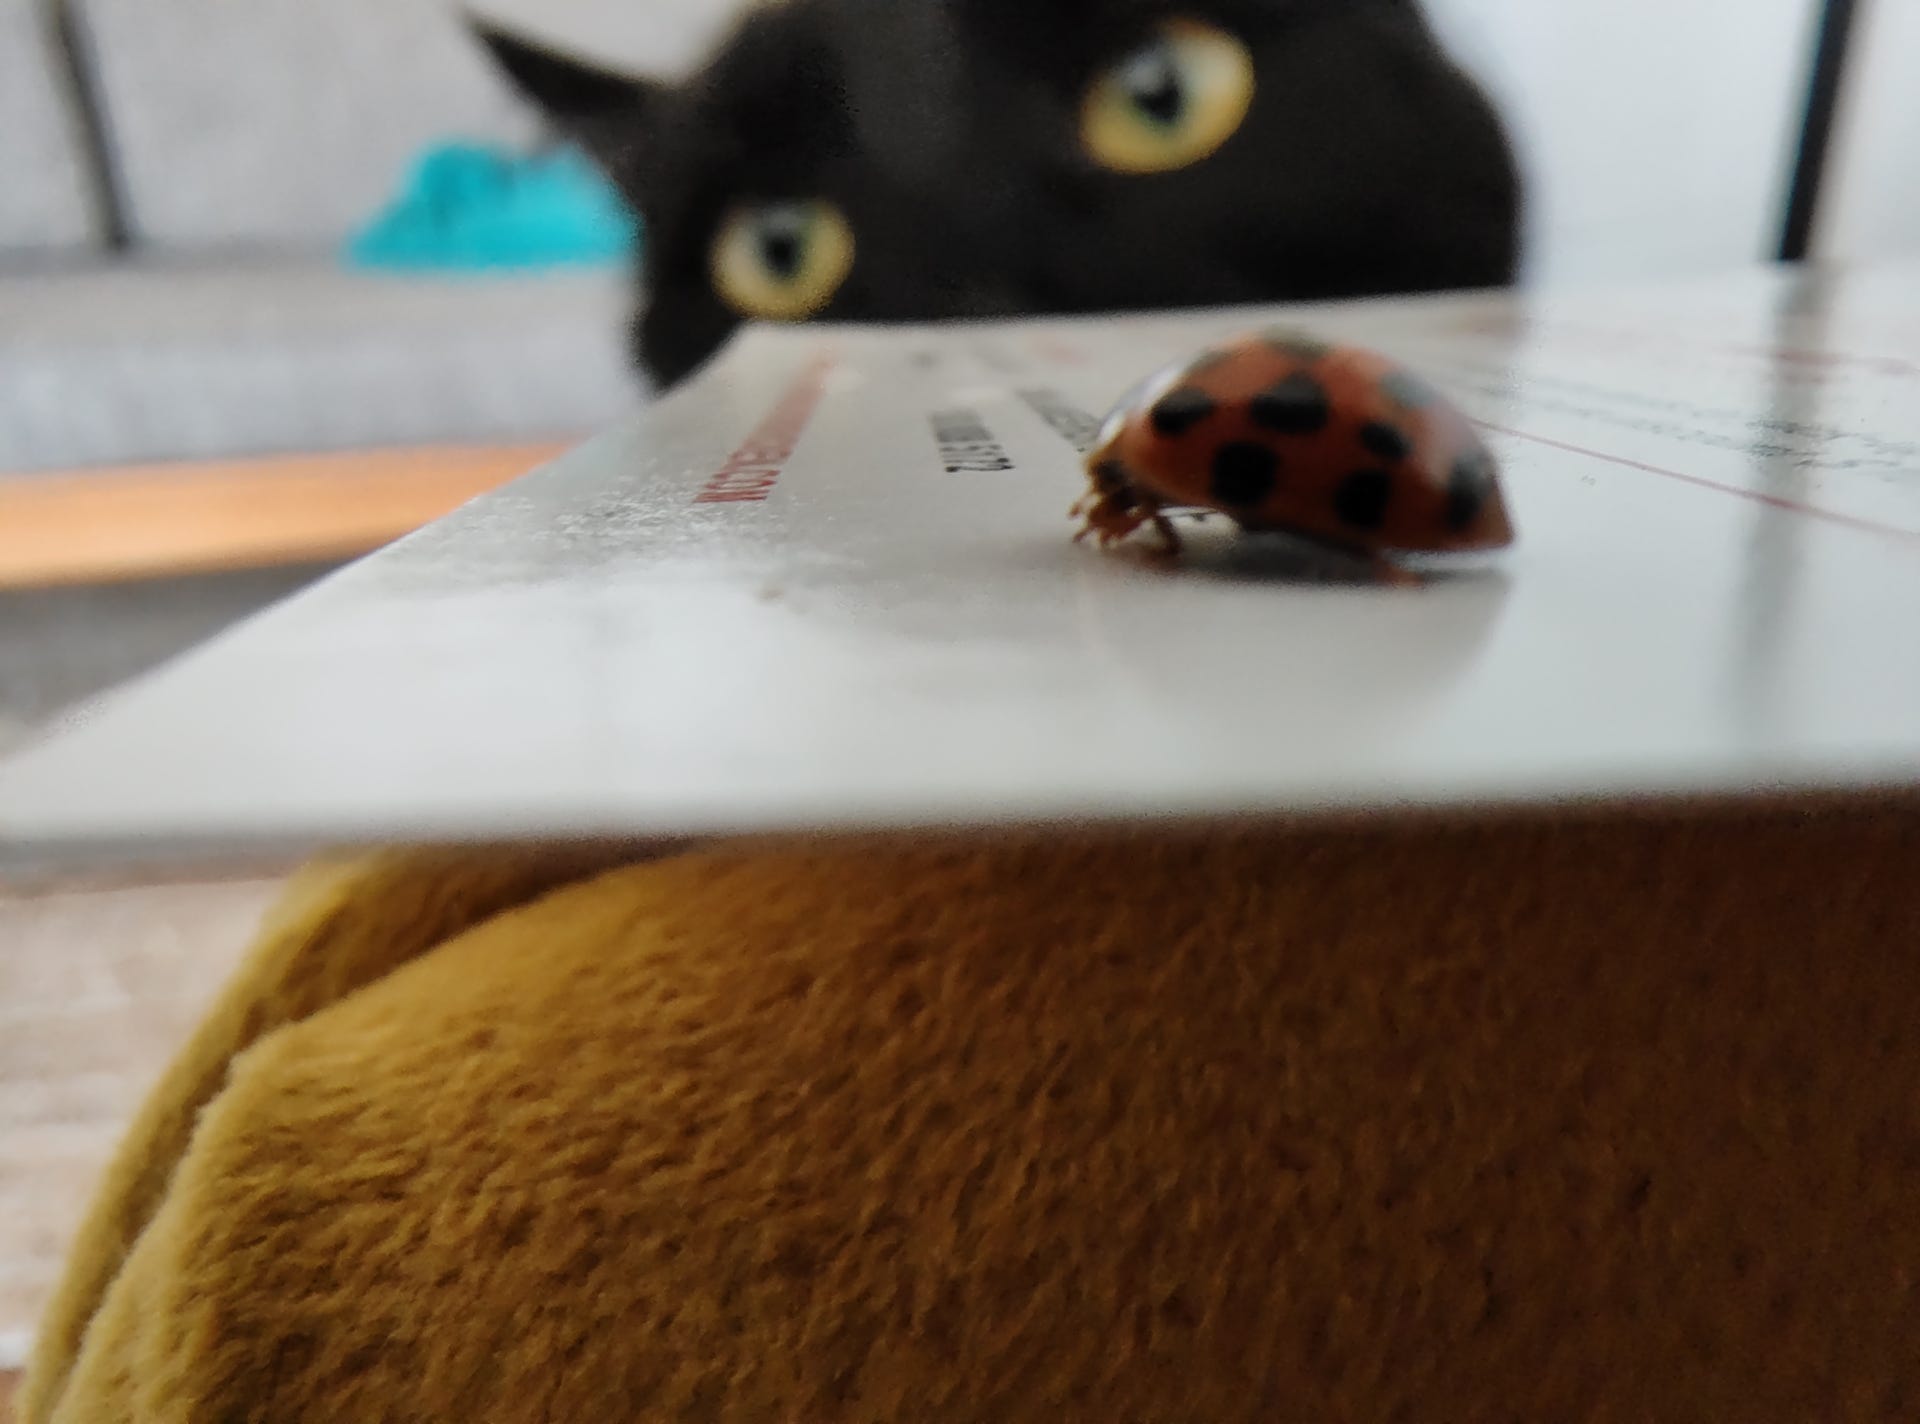 A photo of a ladybug with a cat in the background